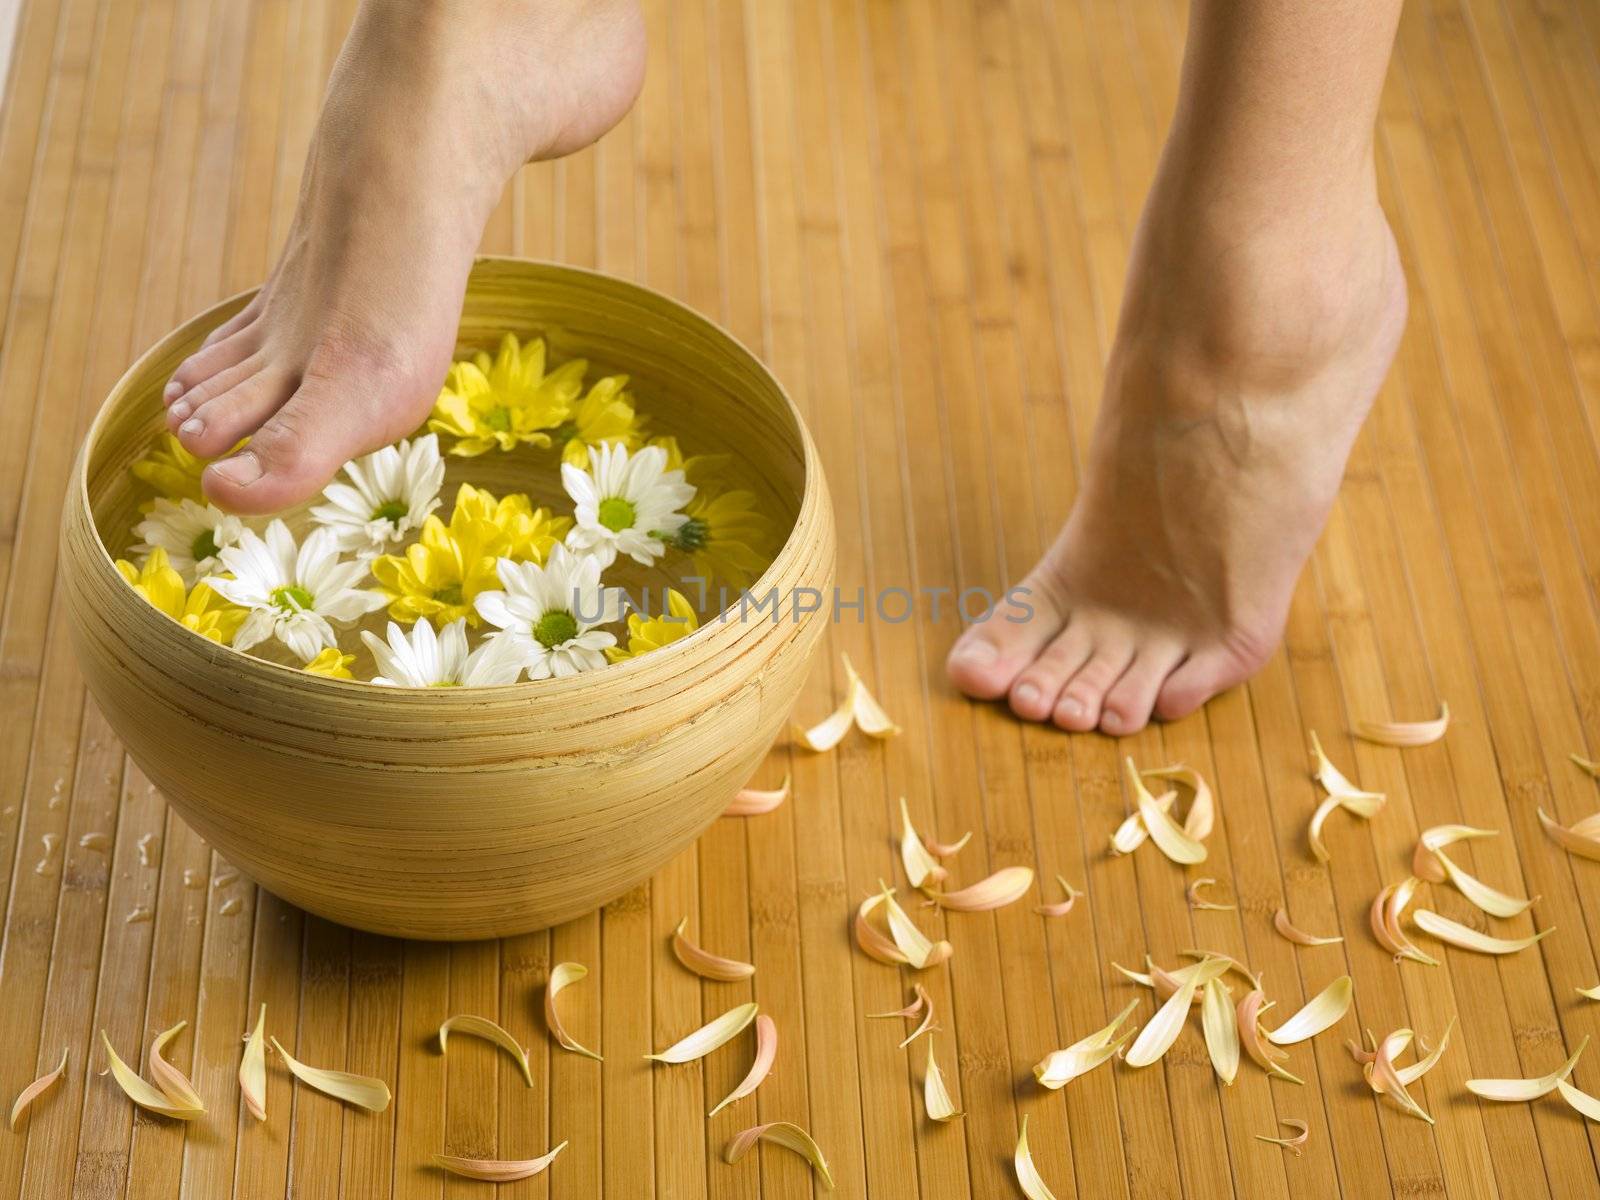 feet near a basin with flowers and water